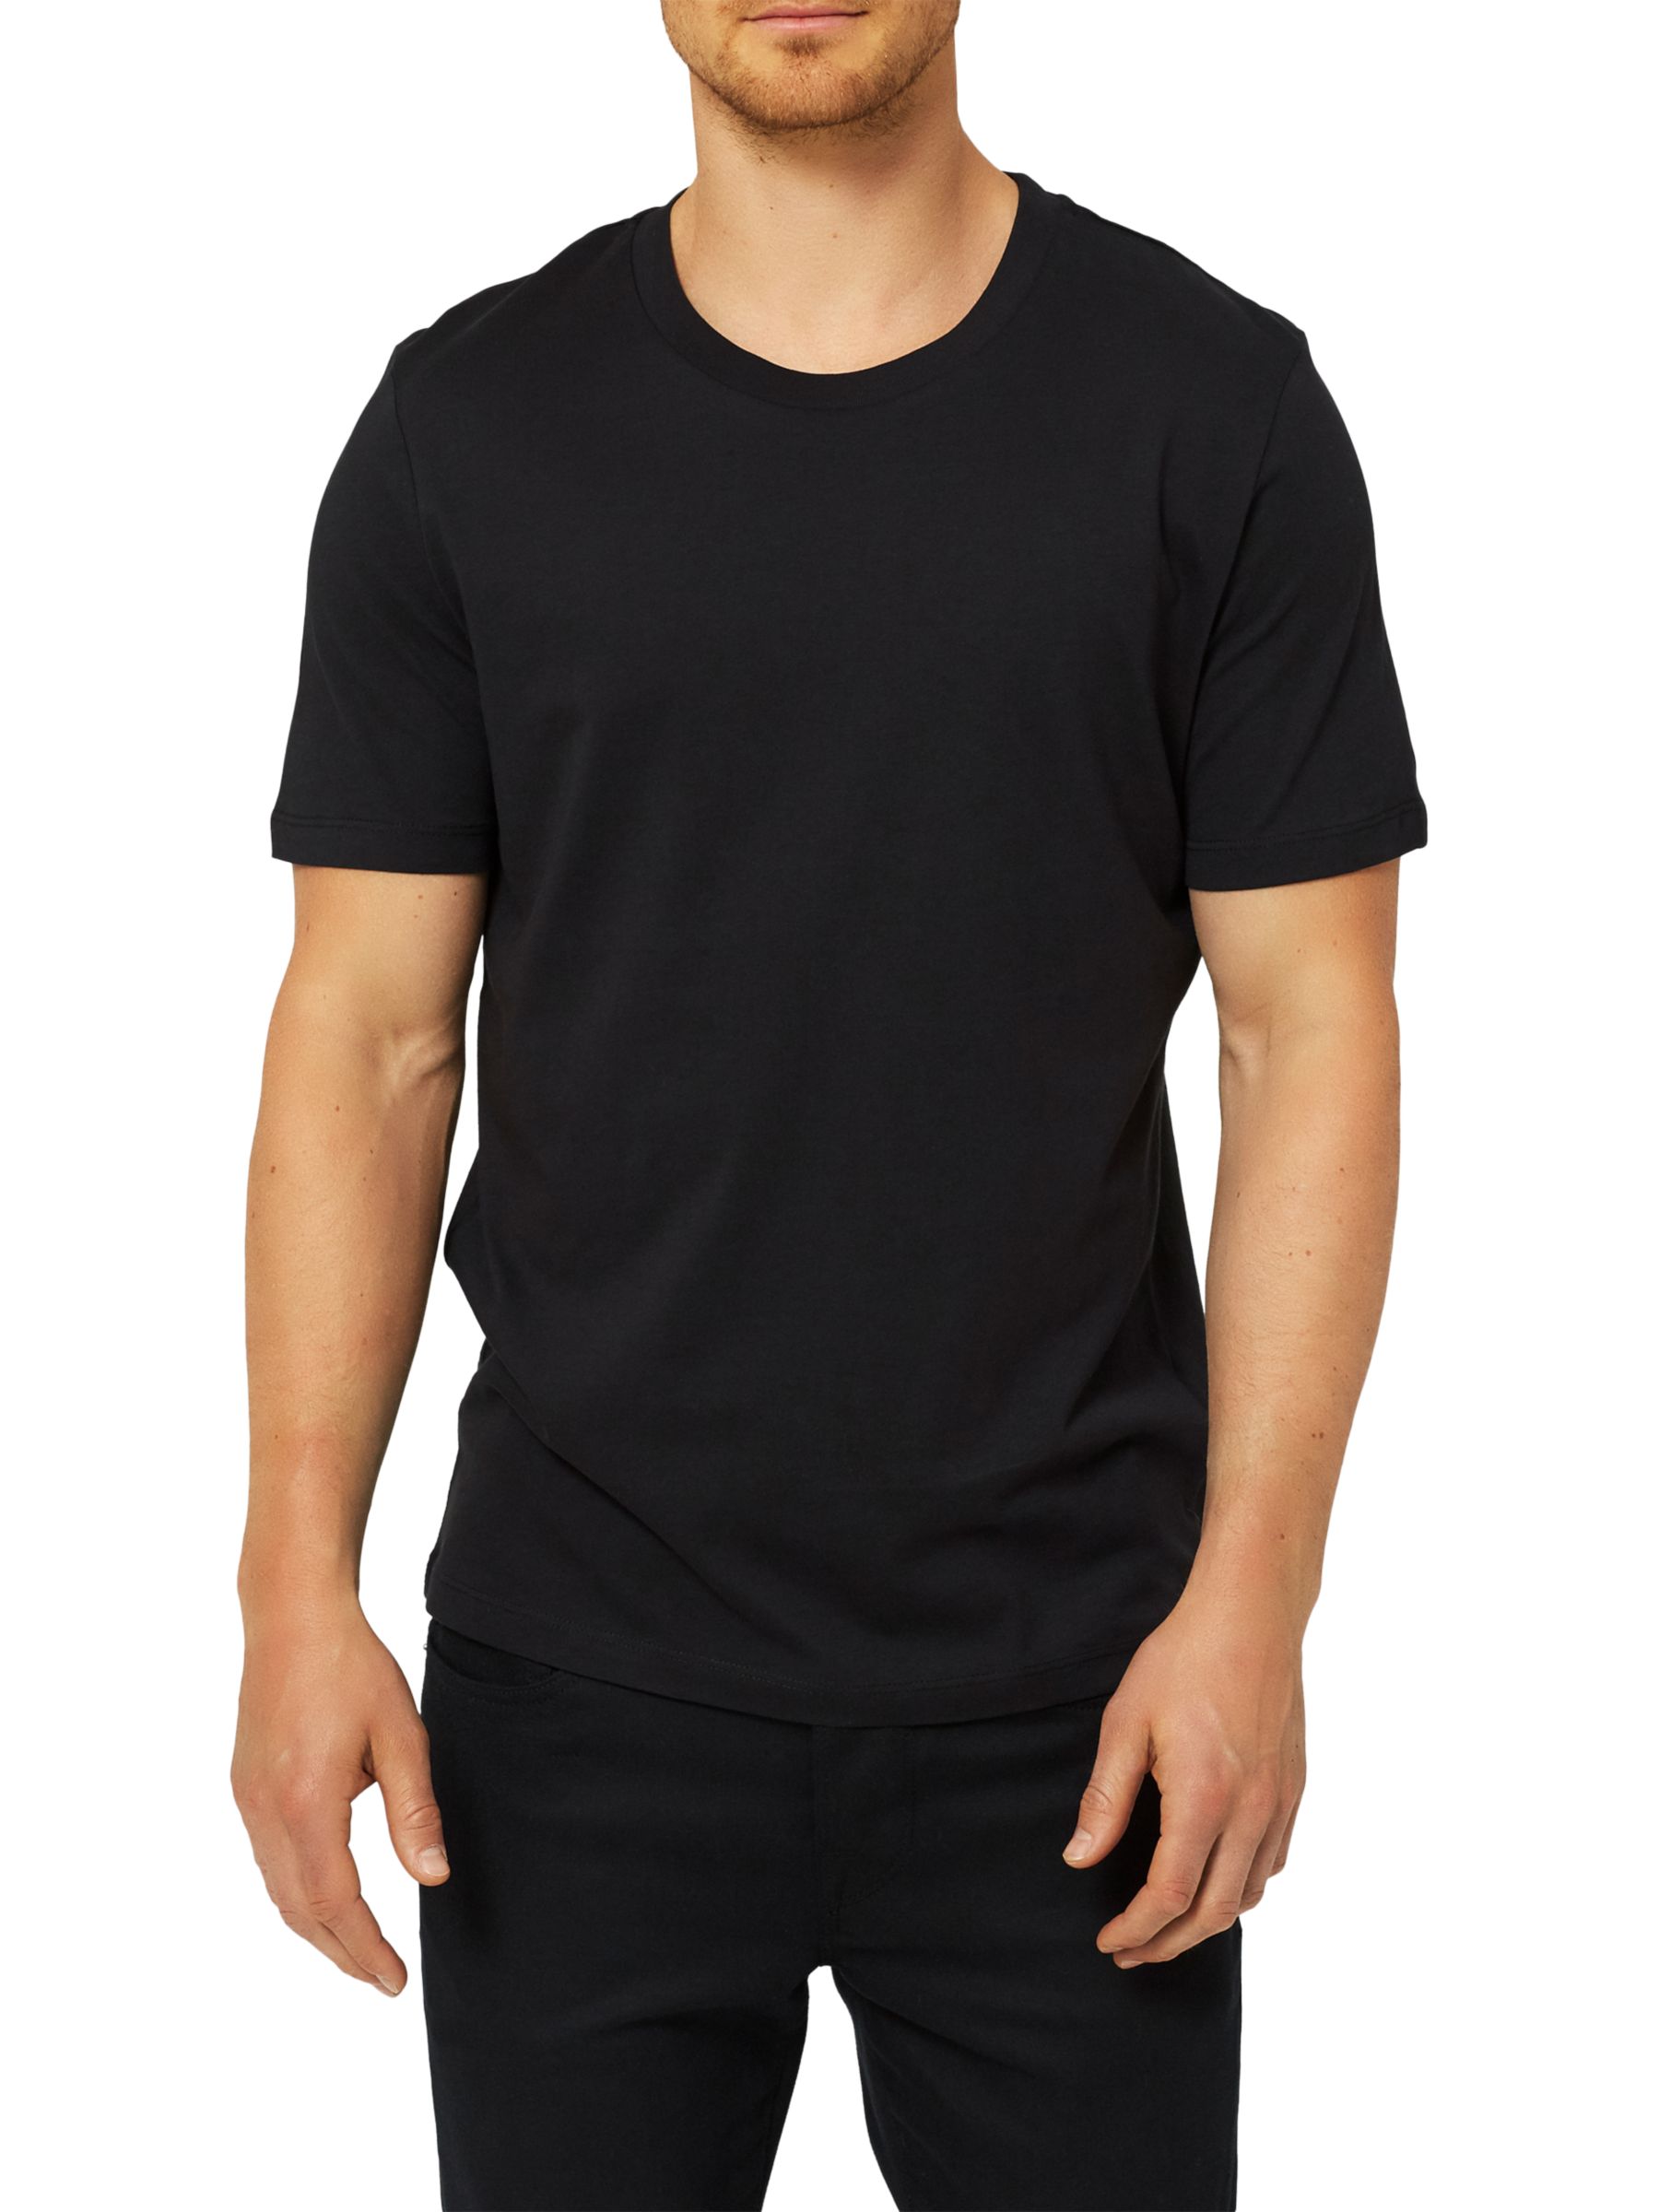 SELECTED HOMME 'The Perfect Tee' Pima Cotton T-Shirt